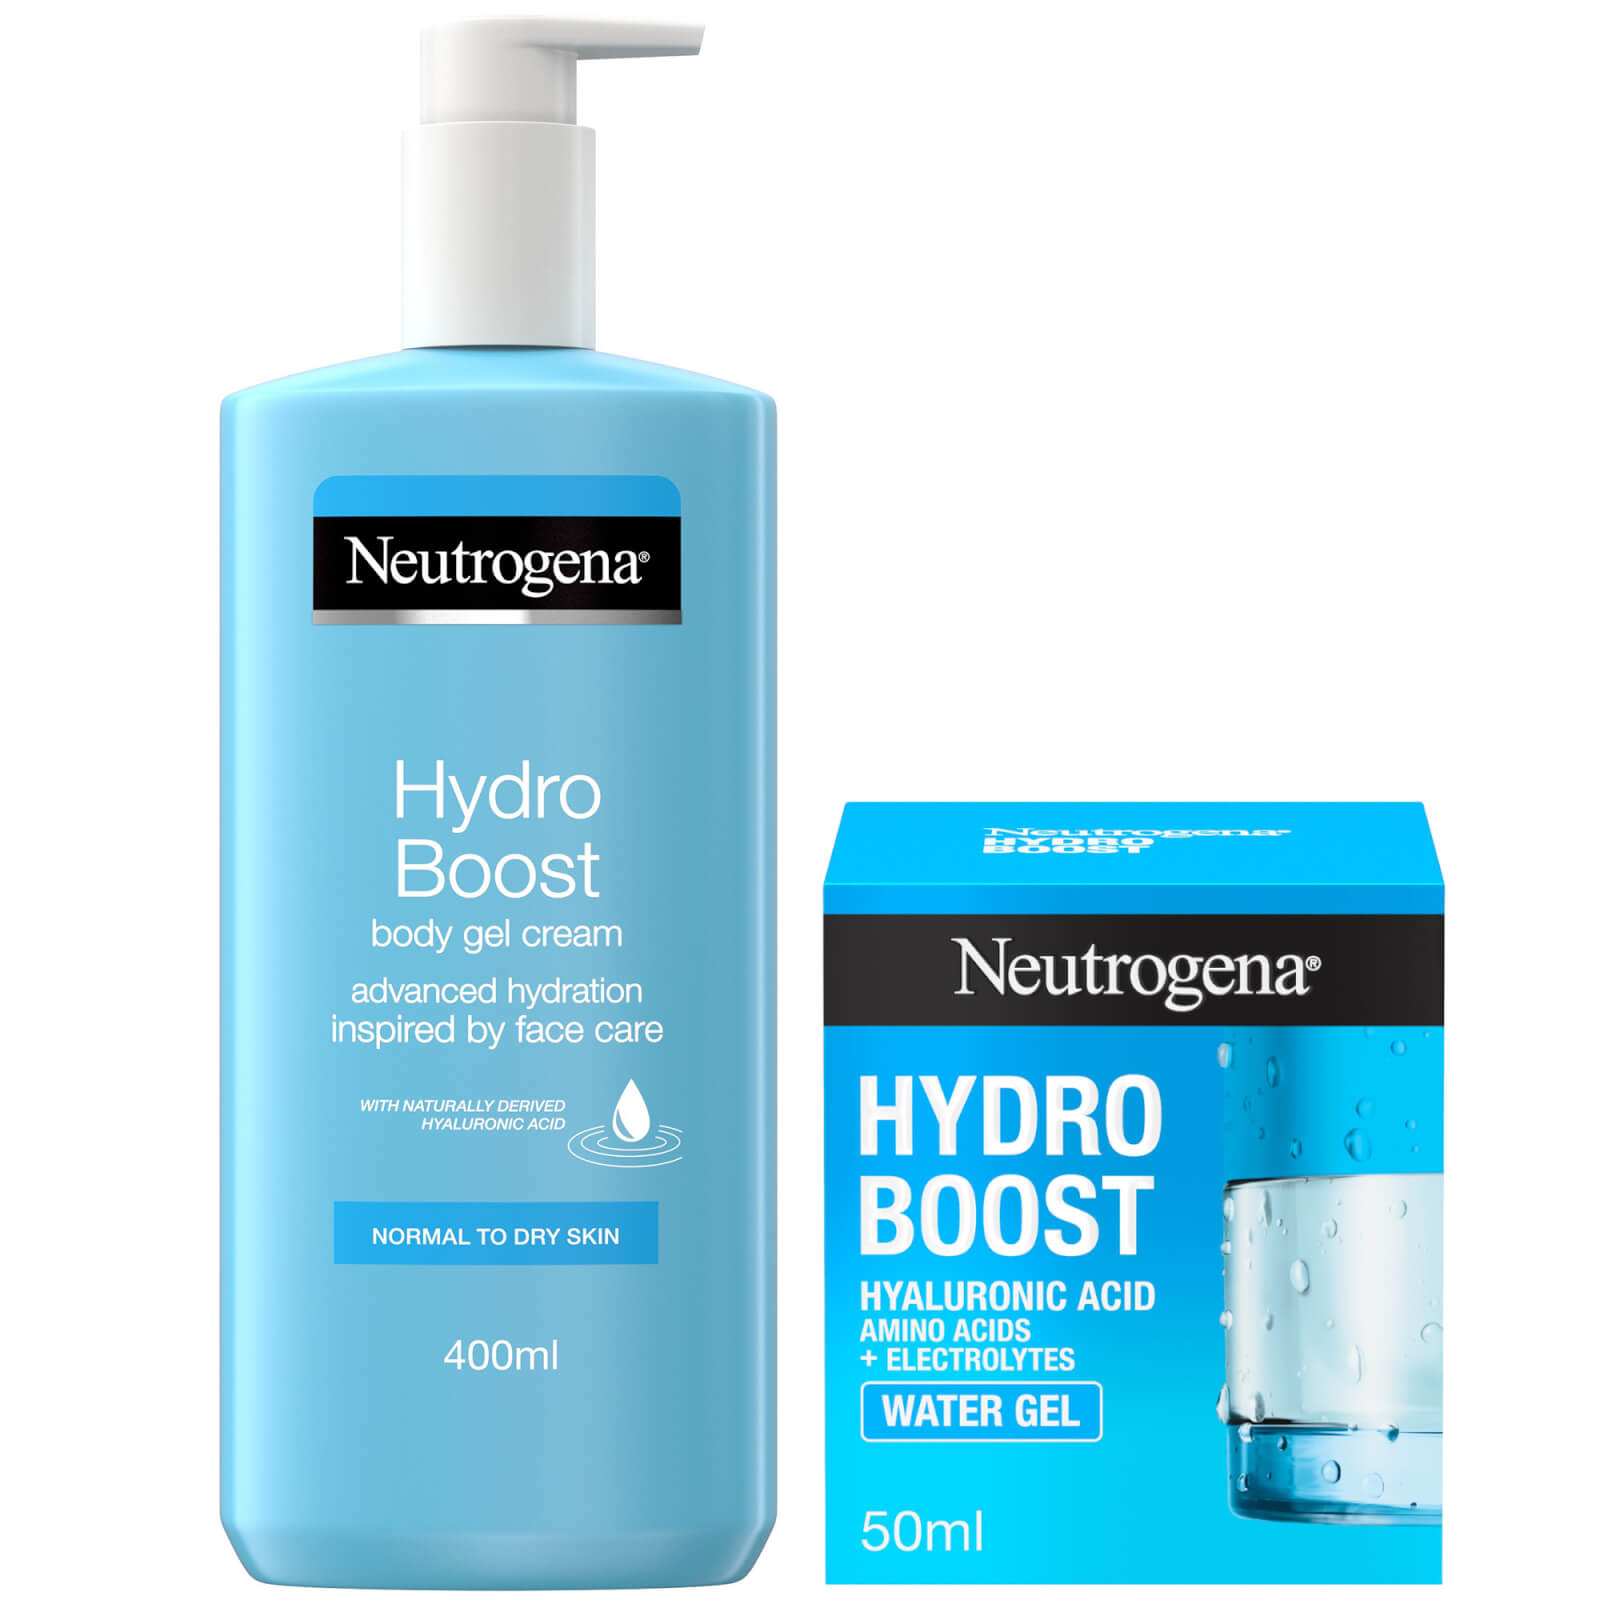 Neutrogena® Top To Toe Hydration Hyaluronic Acid Face And Body Moisturiser Duo